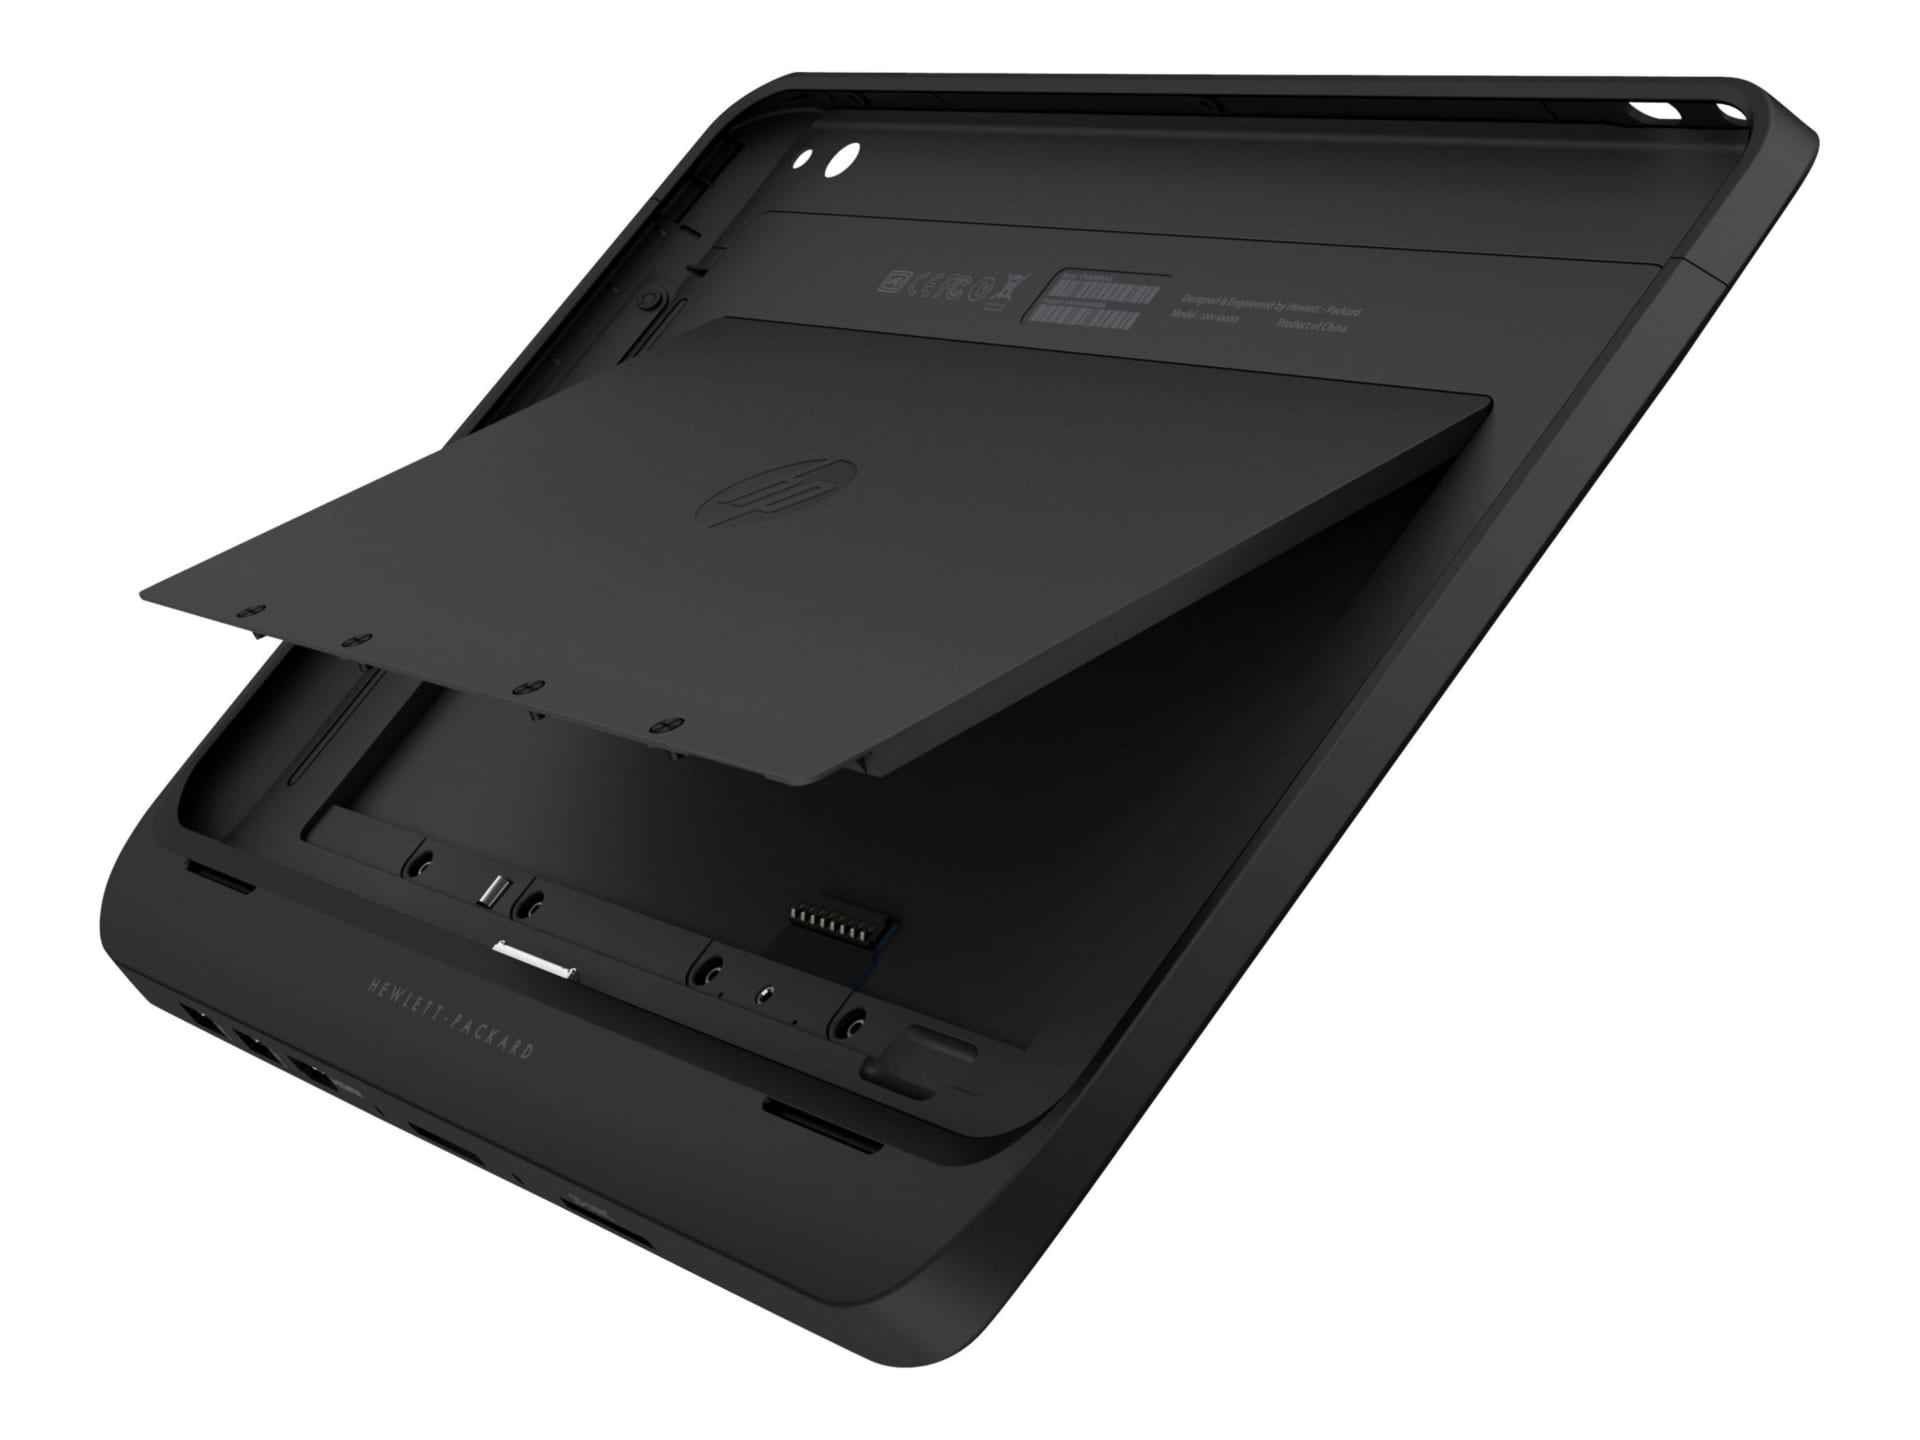 HP ElitePad Expansion Jacket with Battery - expansion jacket